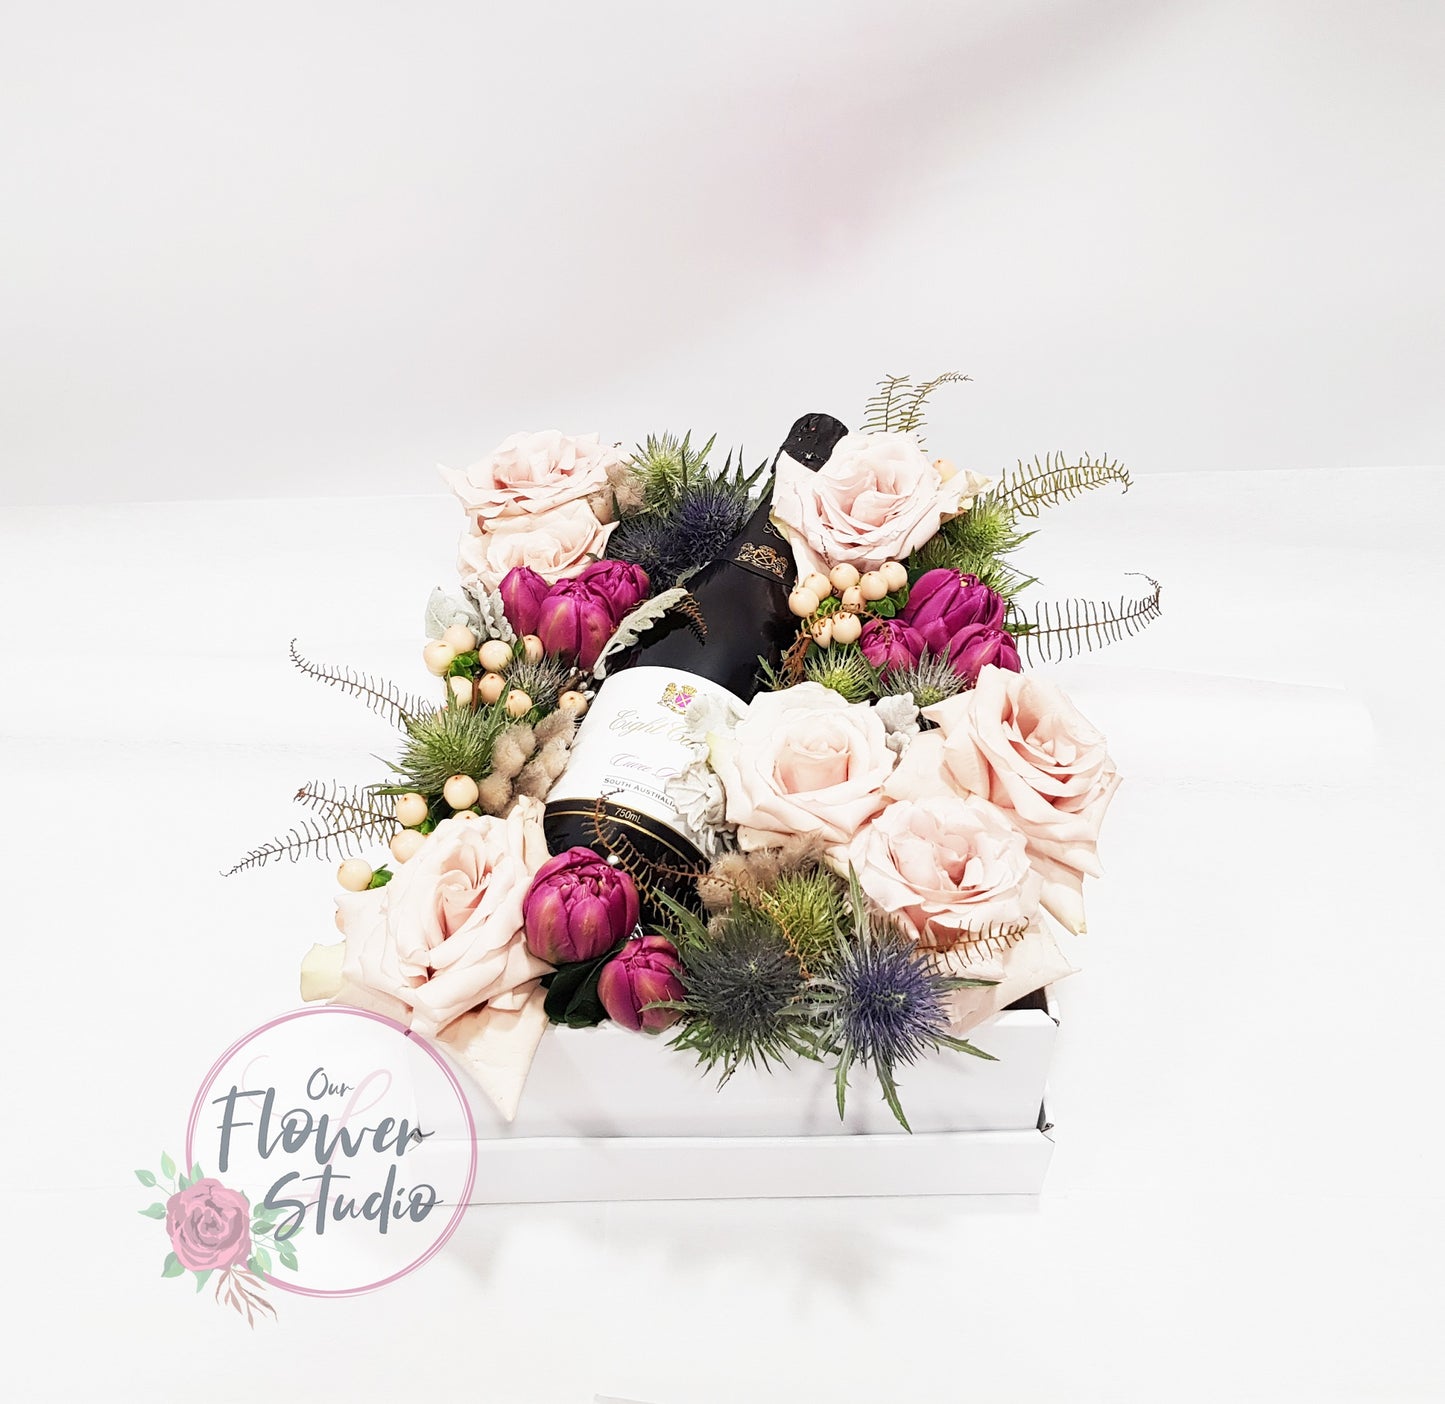 A Moment In Time | Our Flower Studio | Perth Hills Florist